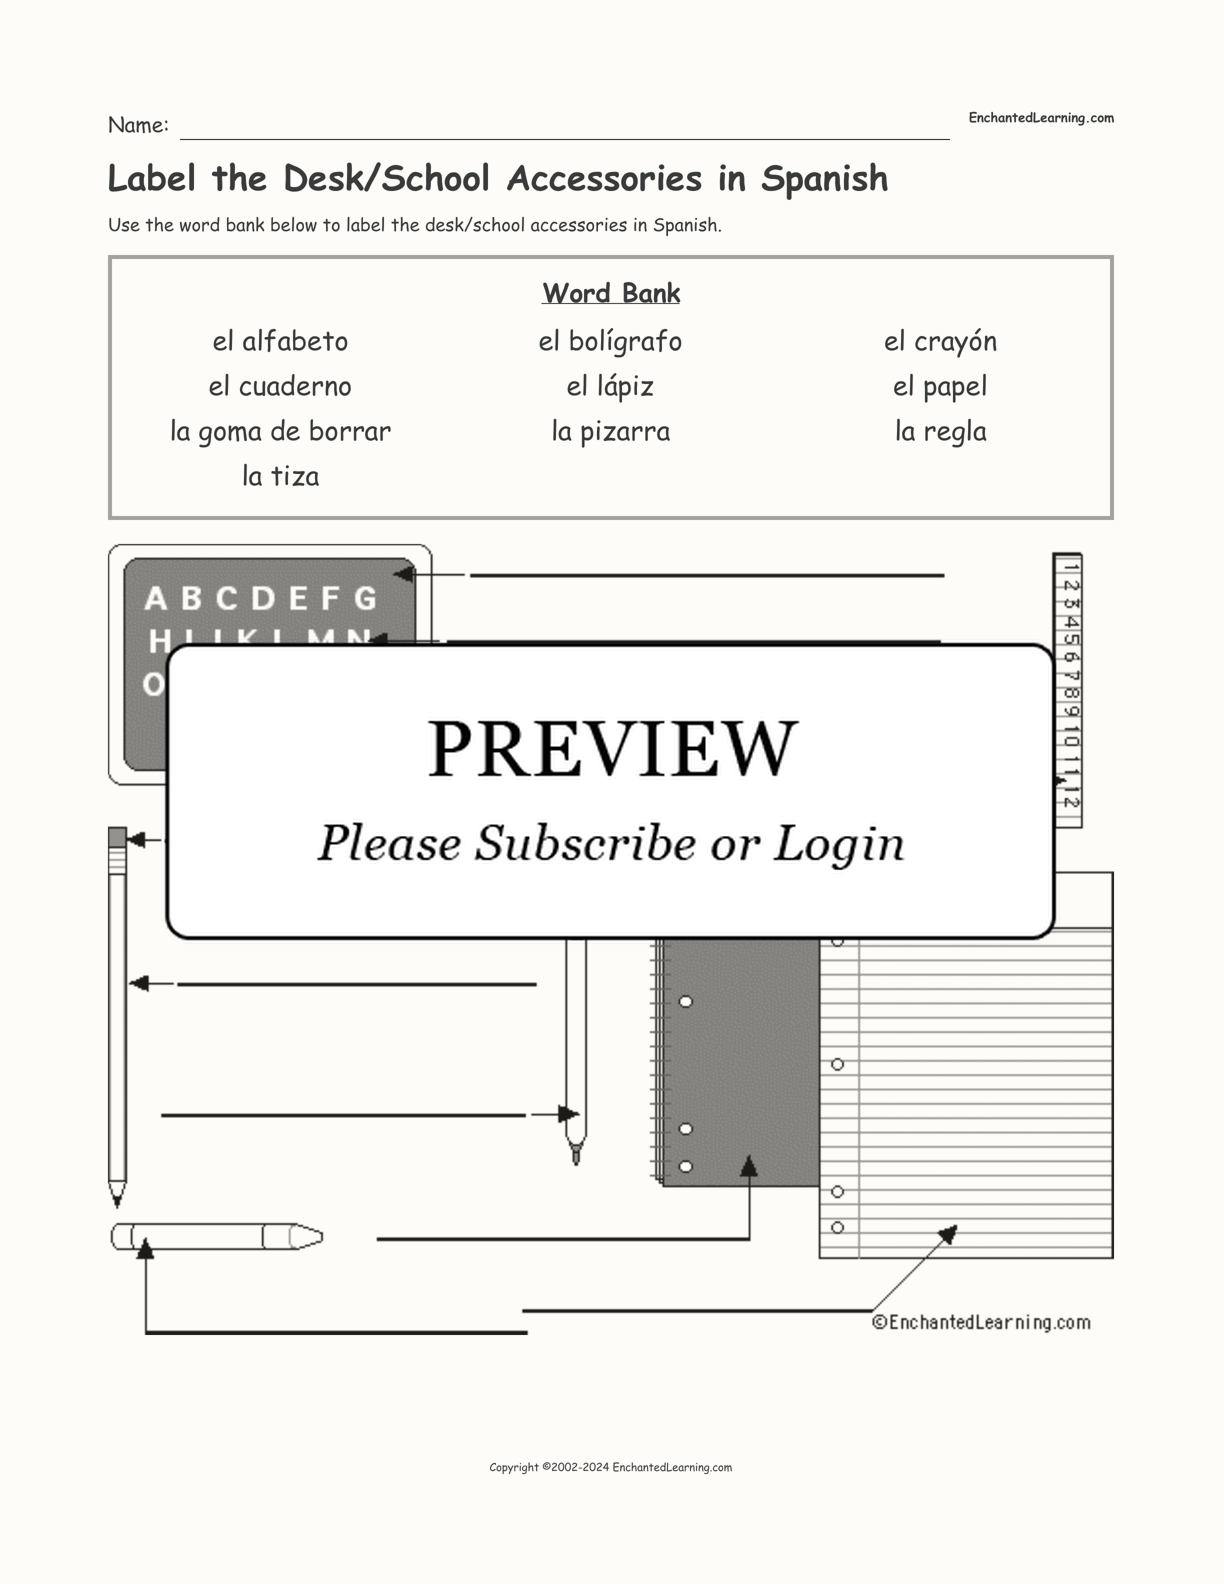 Label the Desk/School Accessories in Spanish interactive worksheet page 1